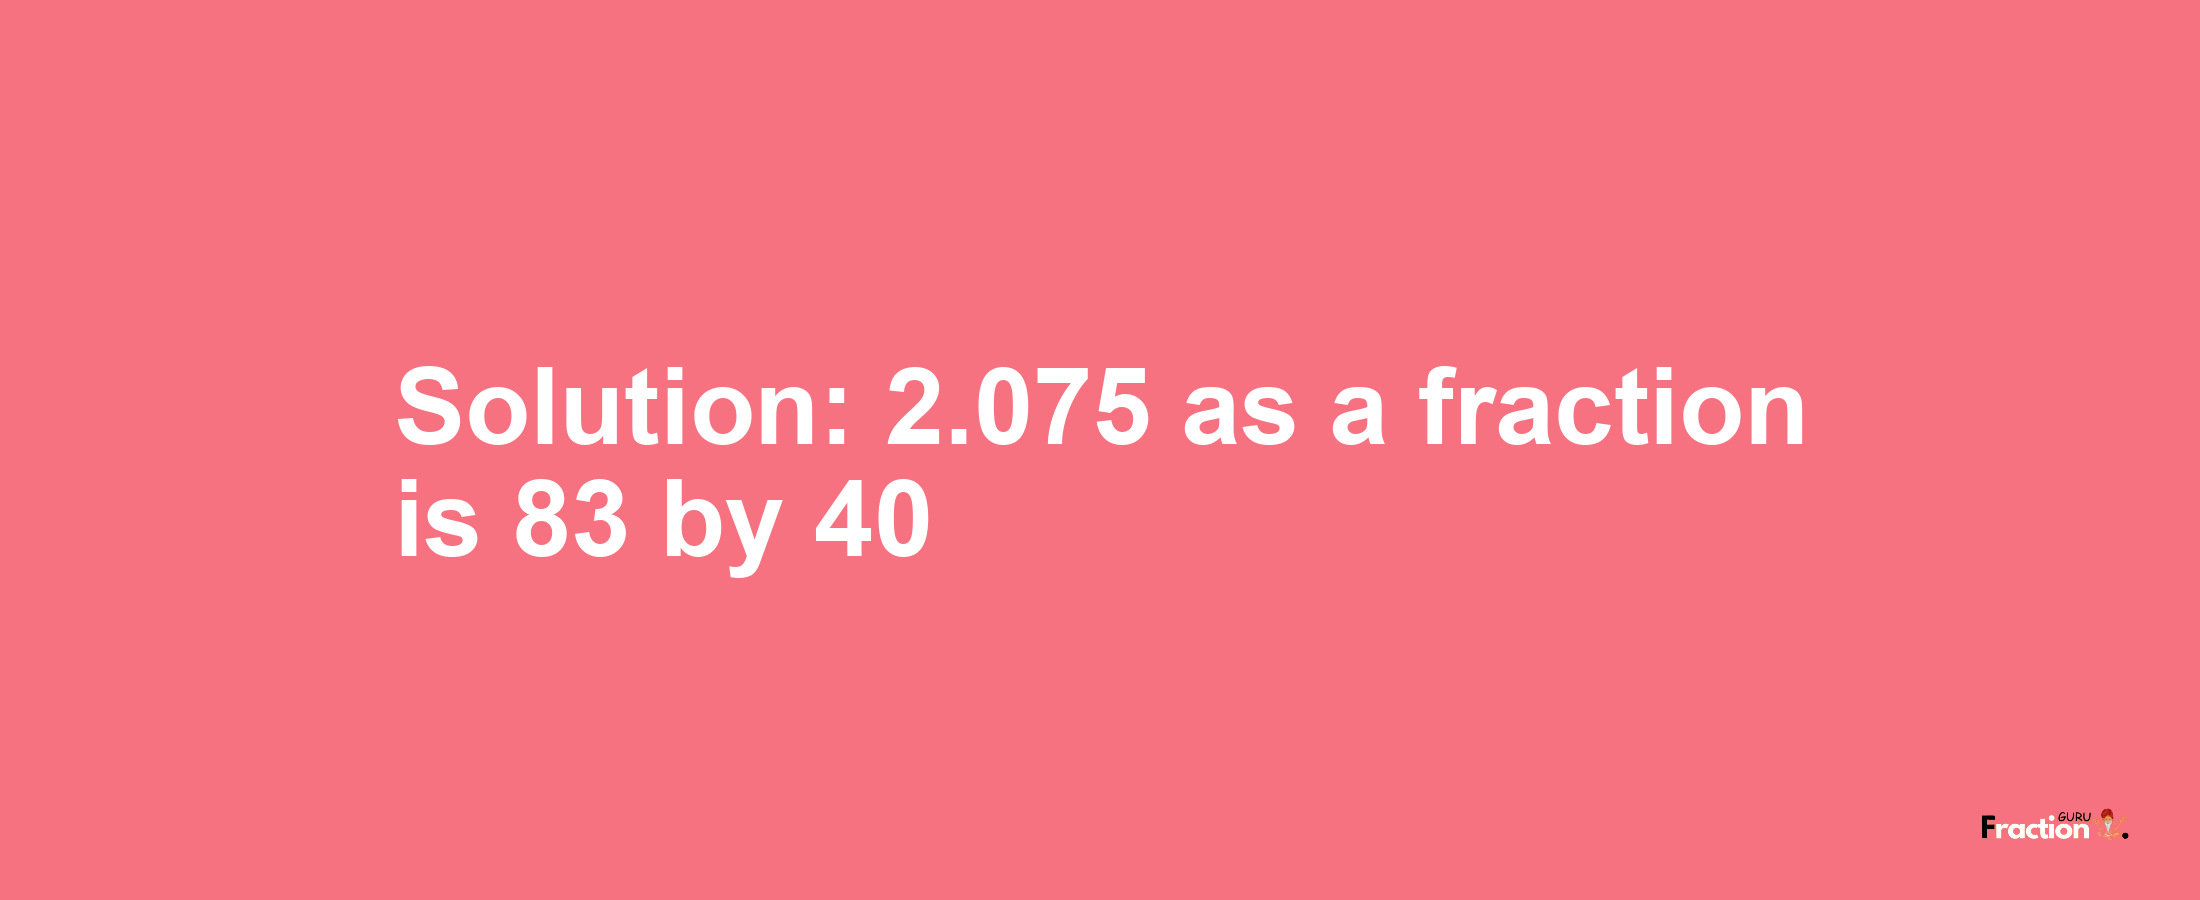 Solution:2.075 as a fraction is 83/40